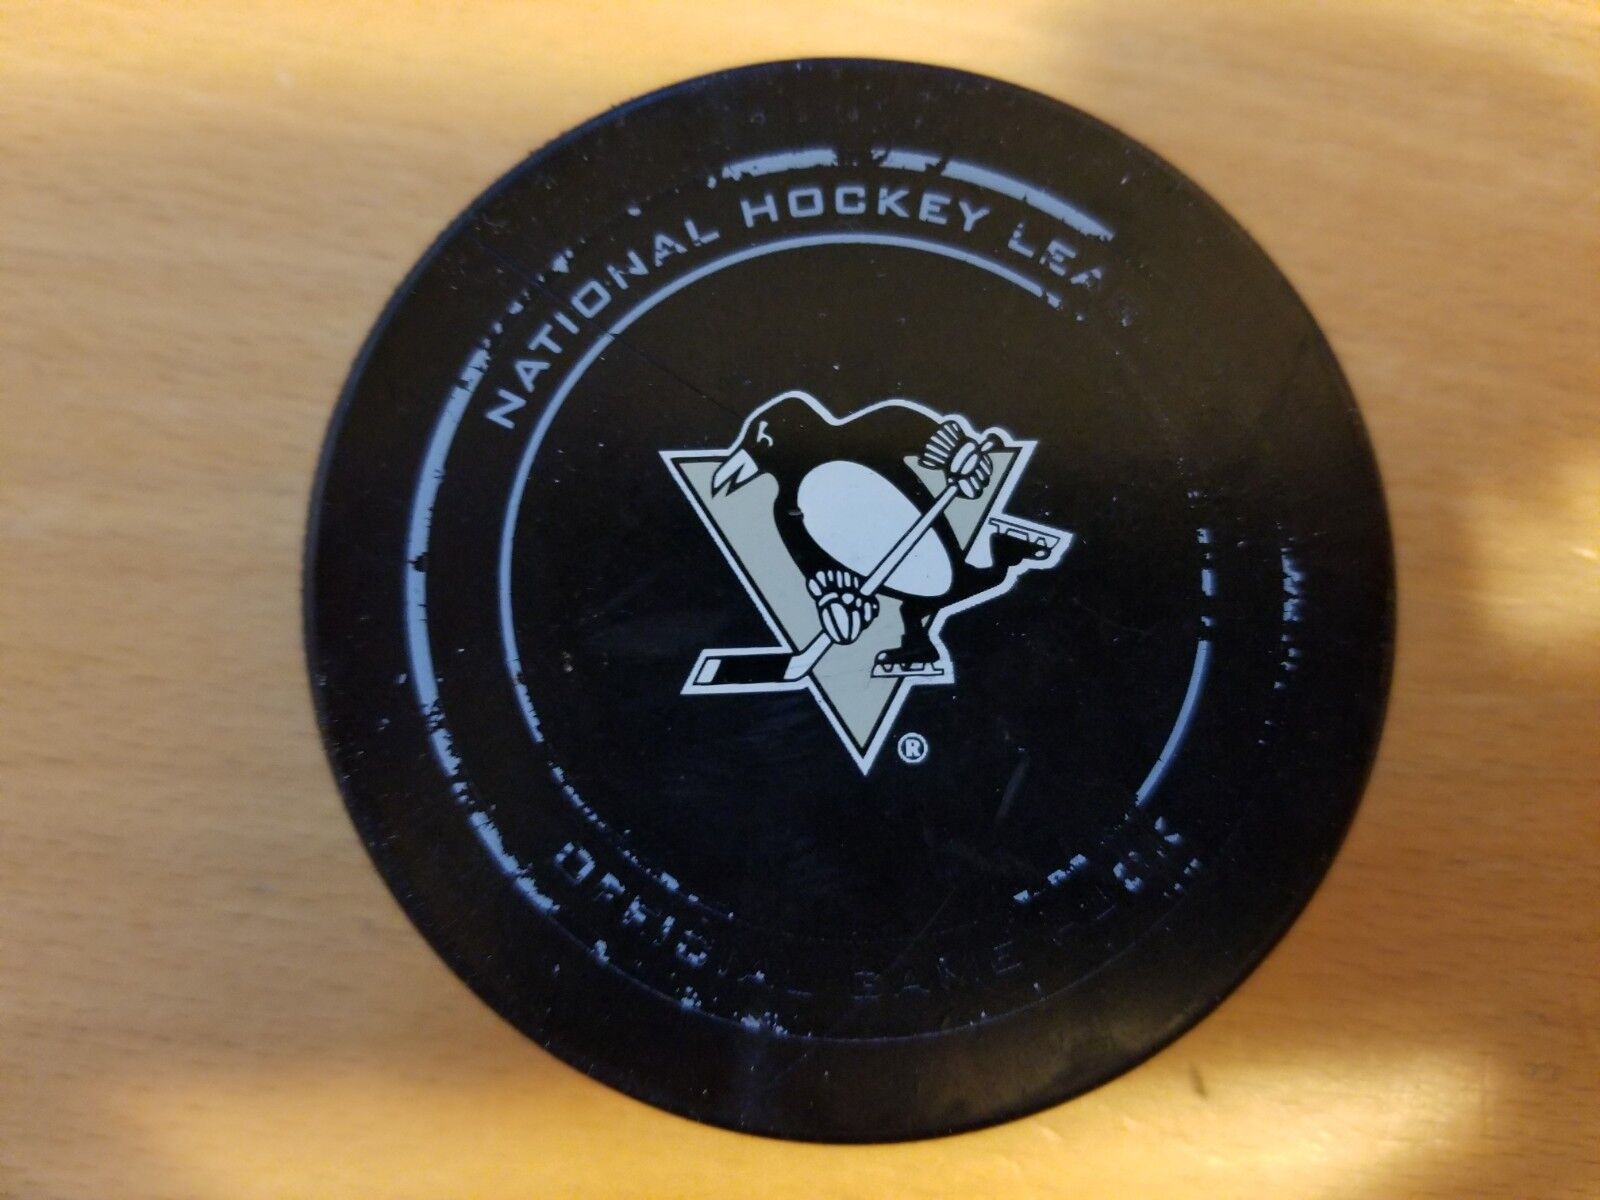 PITTSBURGH PENGUINS 12-20-14 Fleury 301st Win Pouliot Game Used